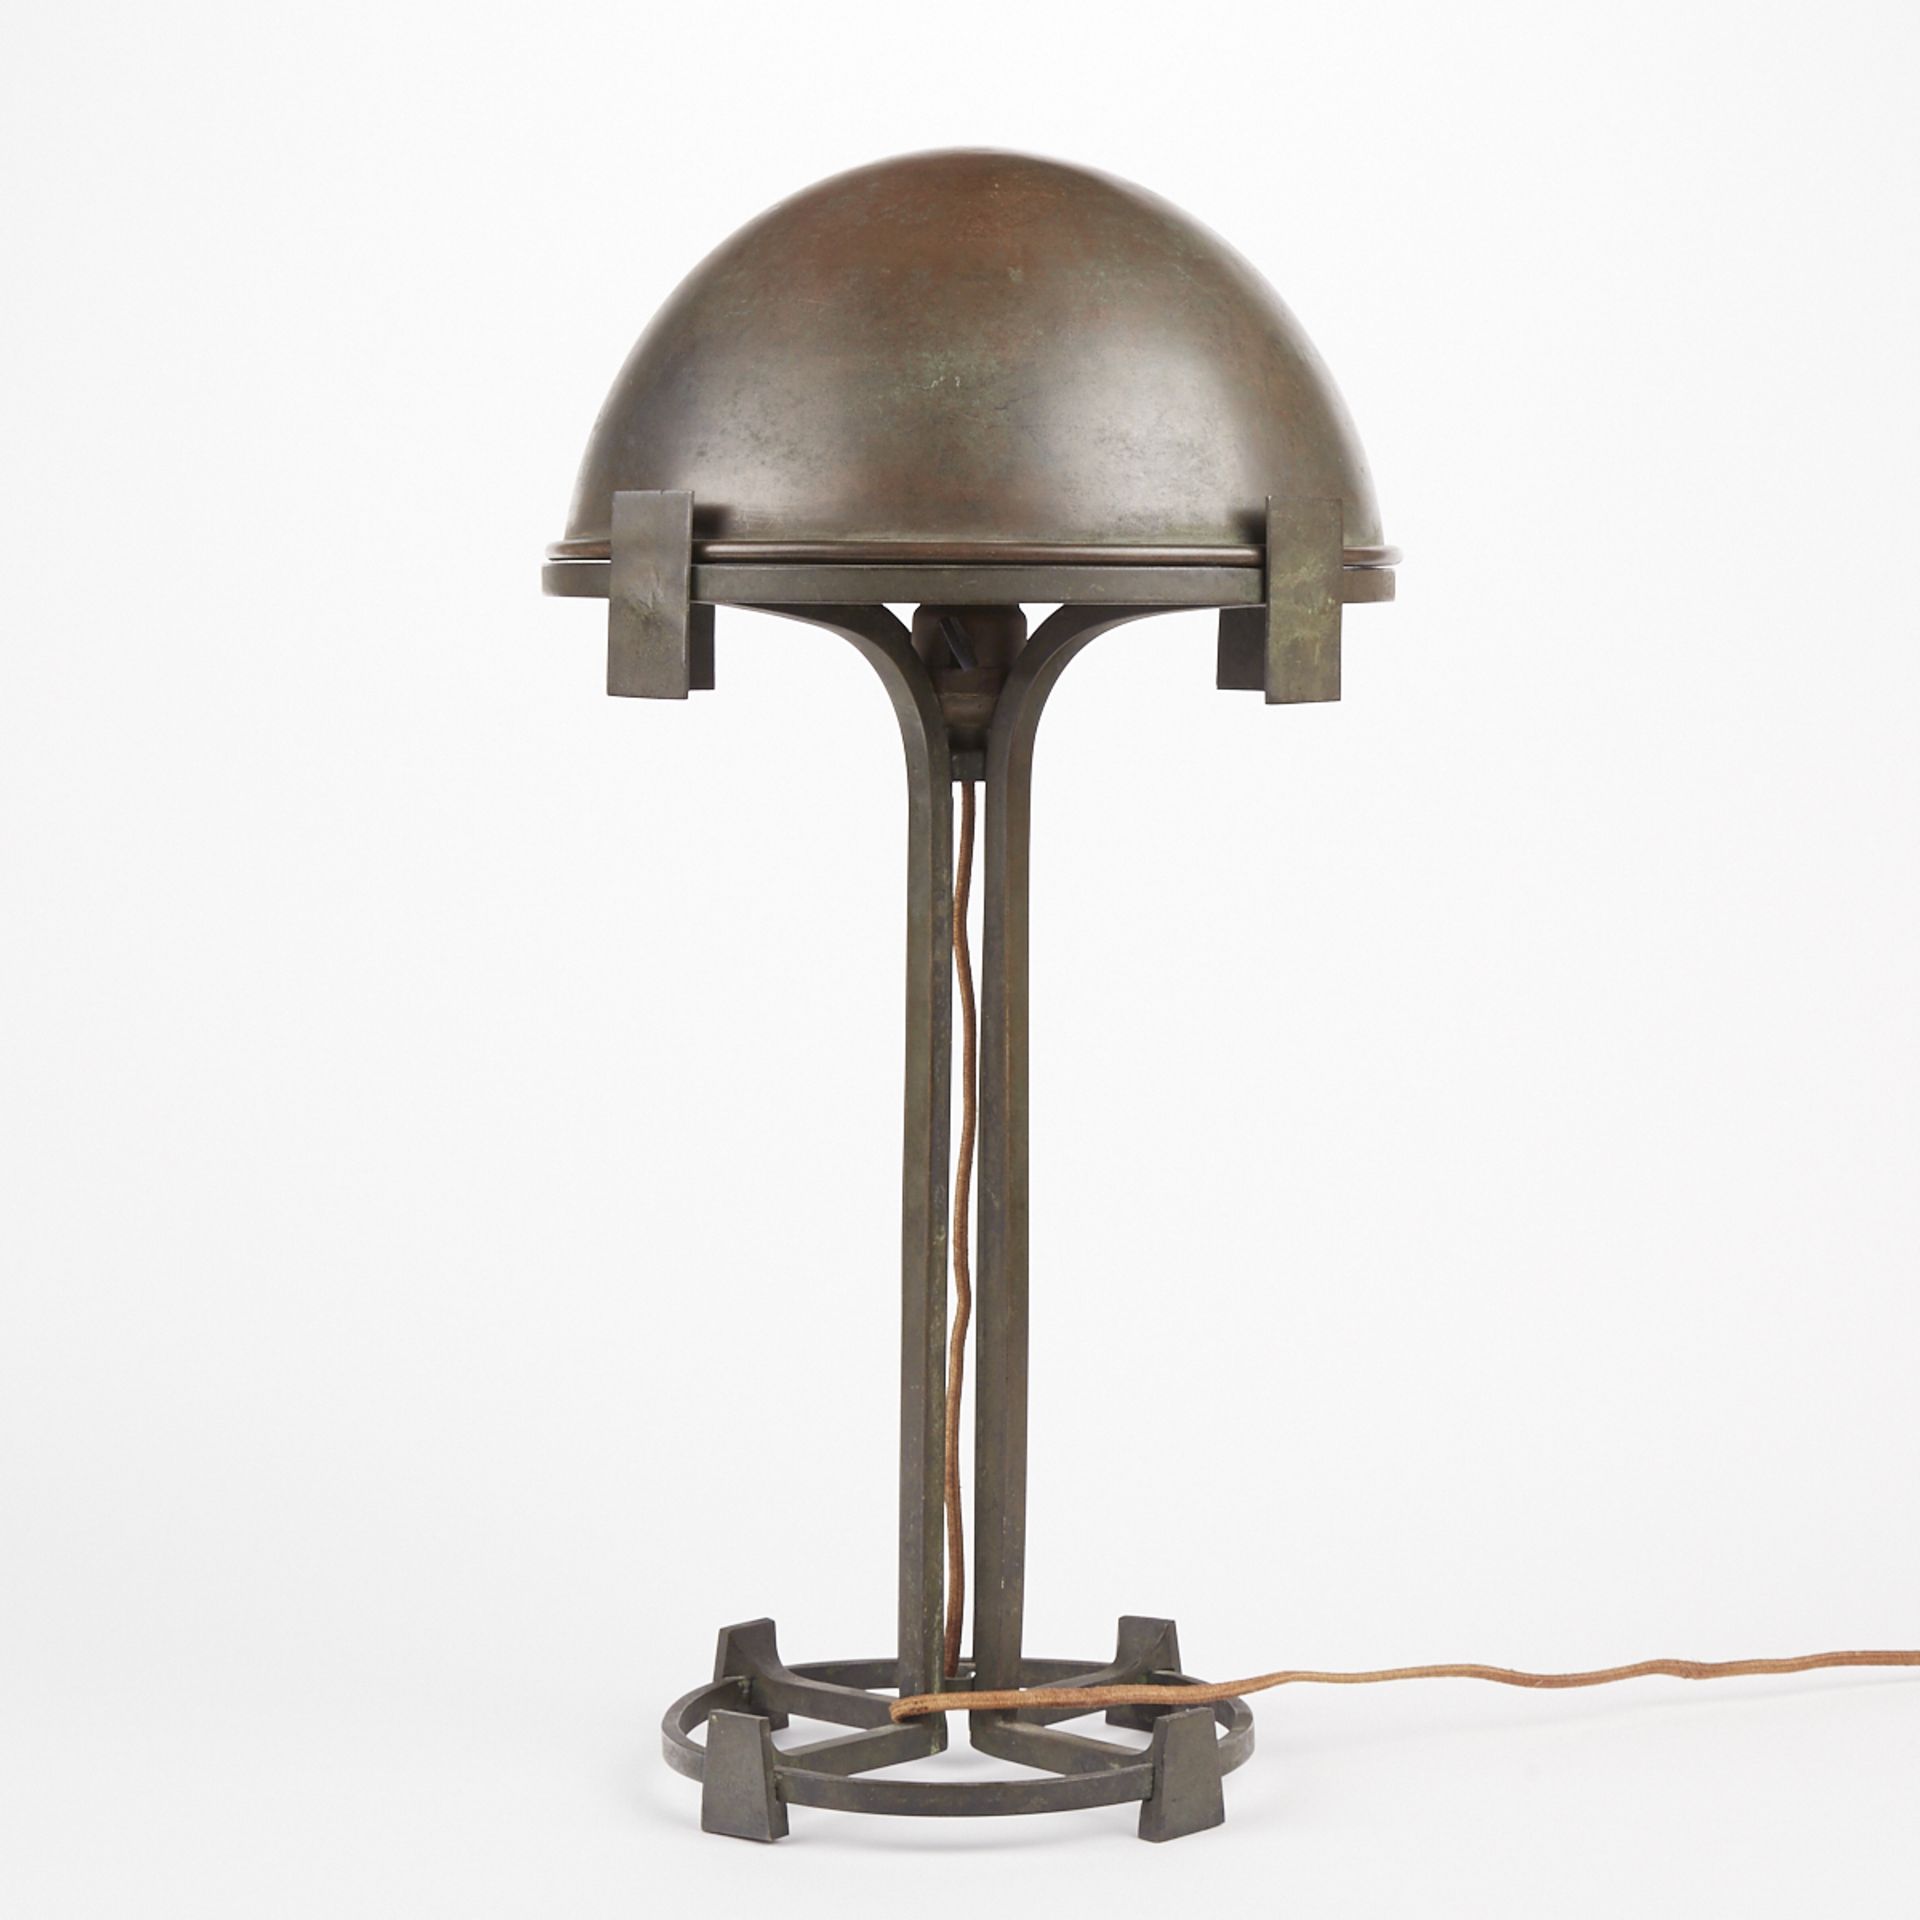 Early 20th c. Secessionist Dome Desk Lamp Mkd Germany - Image 5 of 7